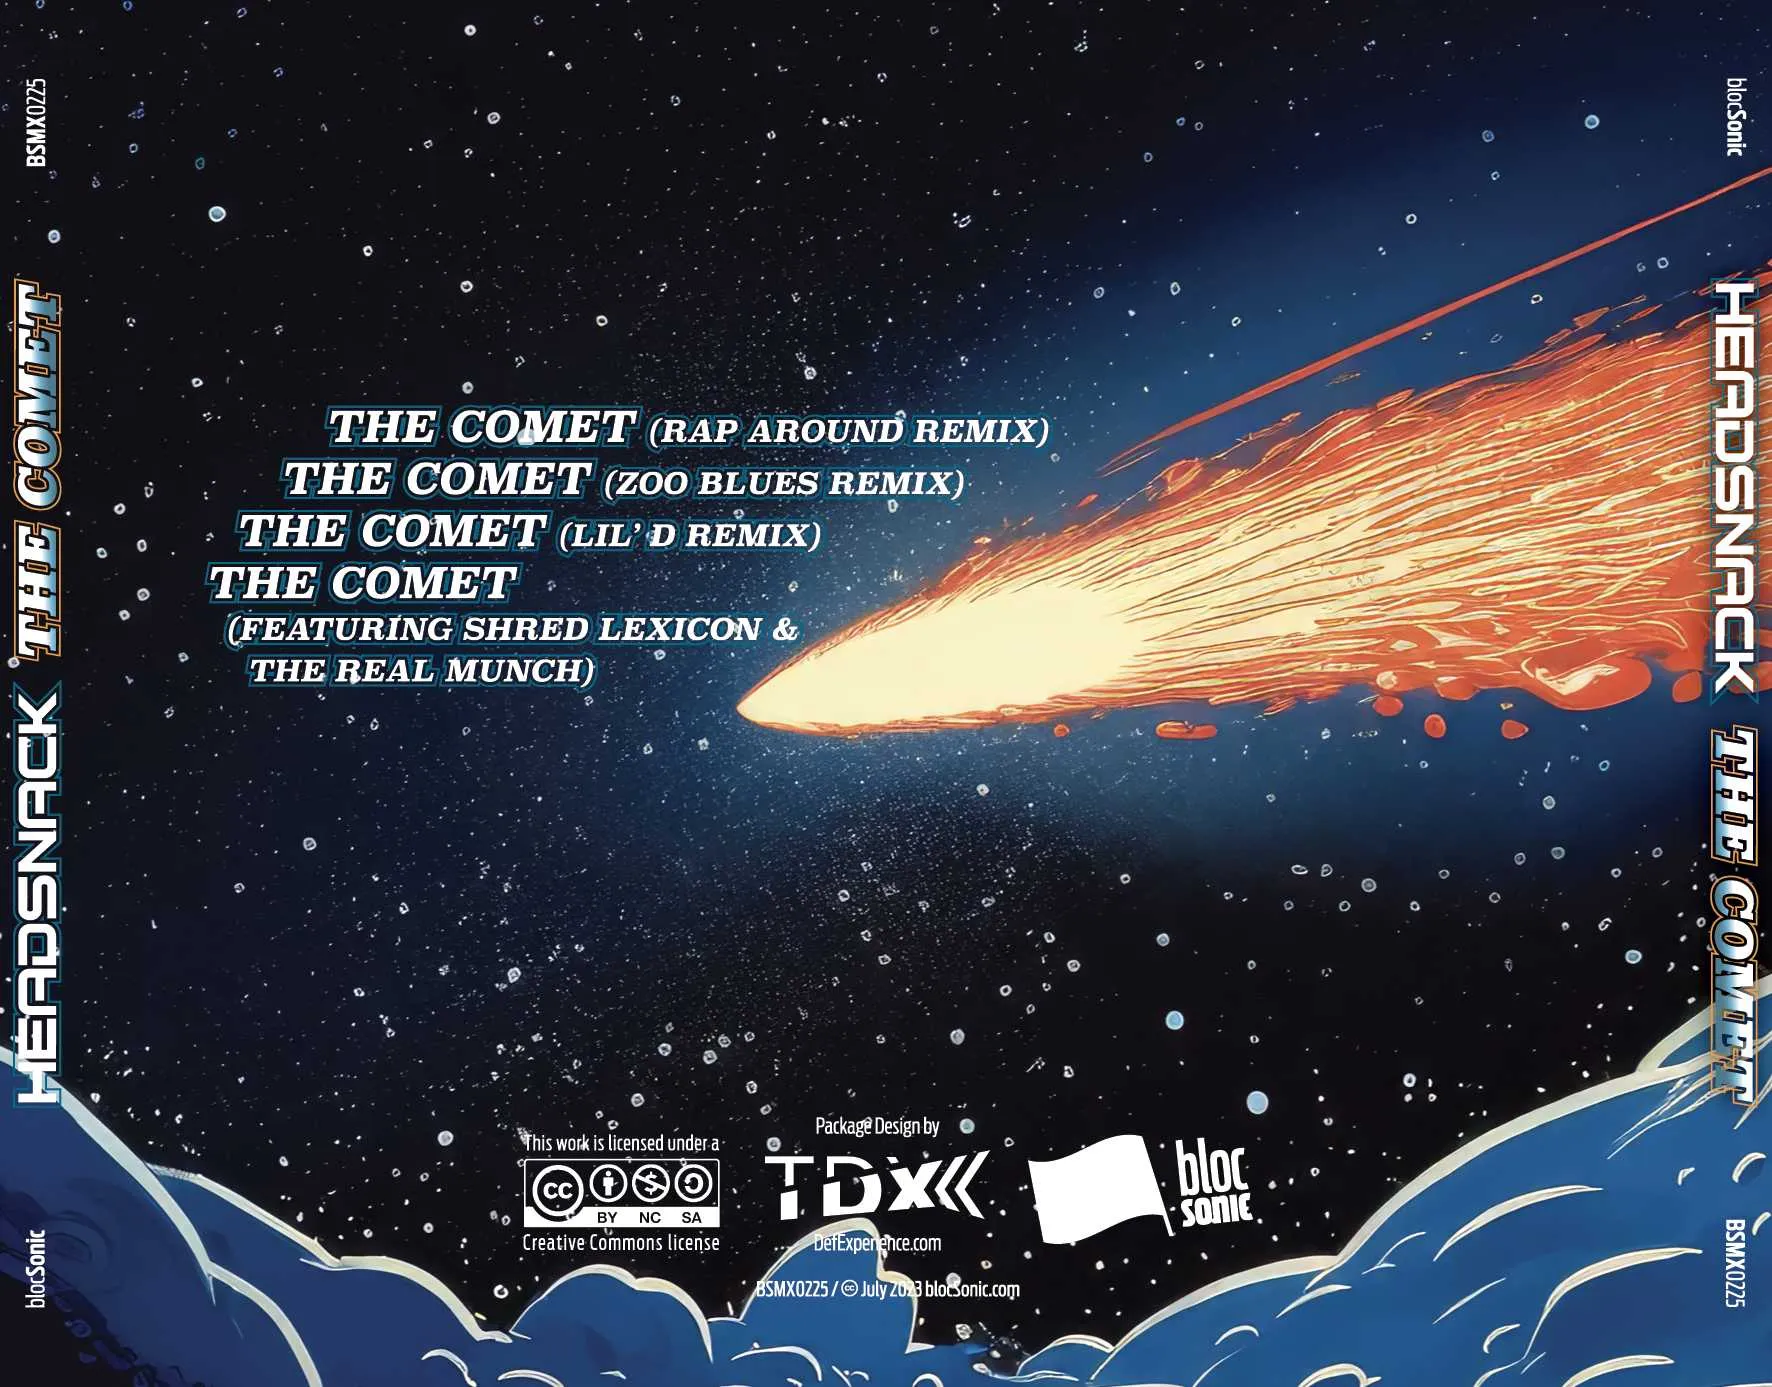 Album traycard for “The Comet” by Headsnack